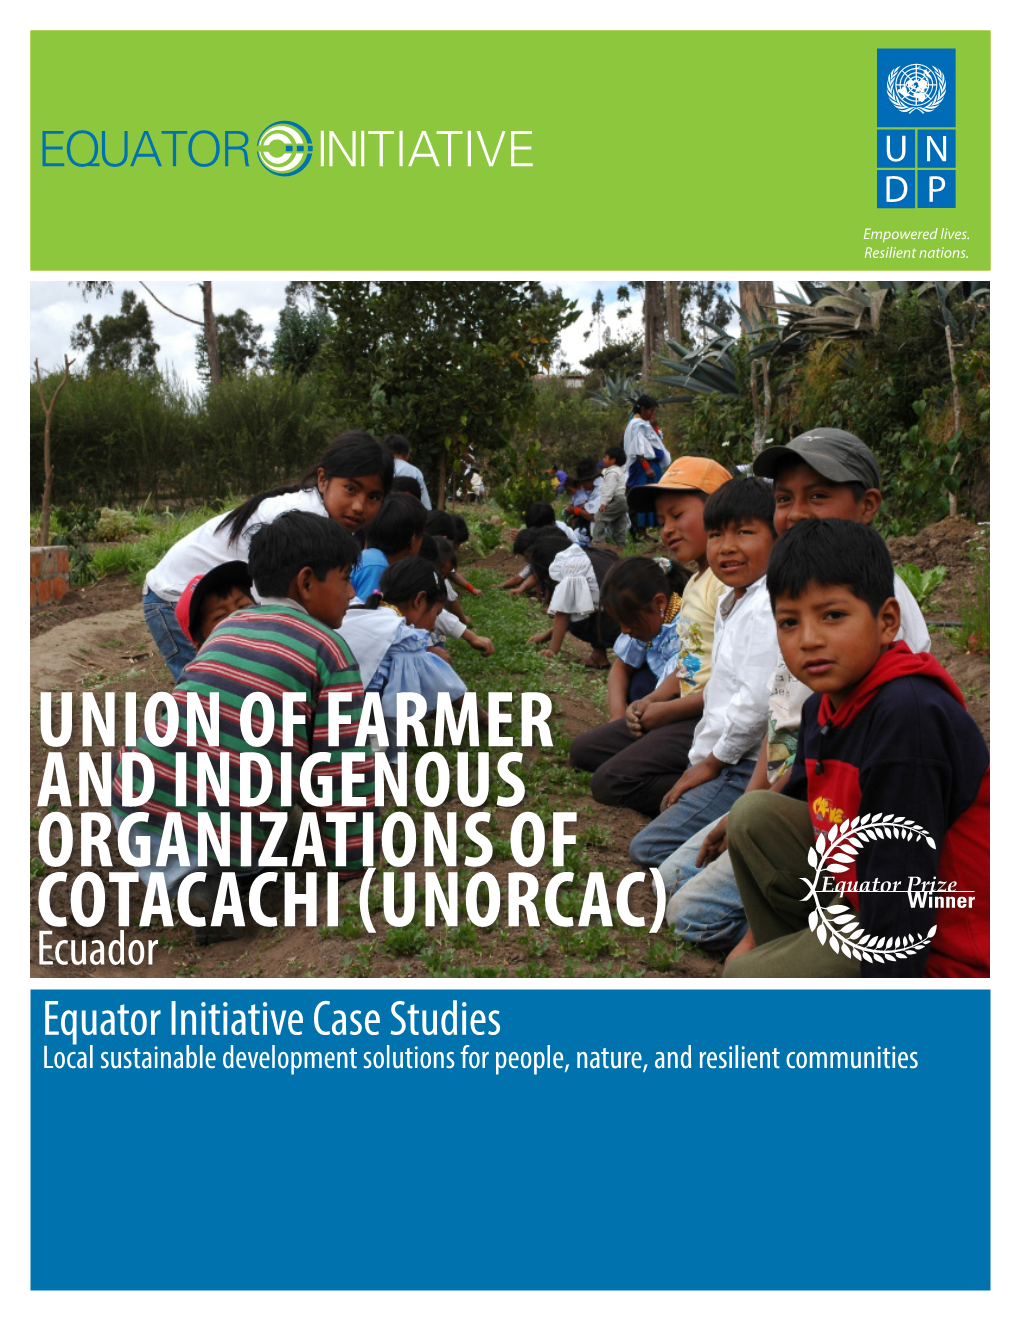 Union of Farmer and Indigenous